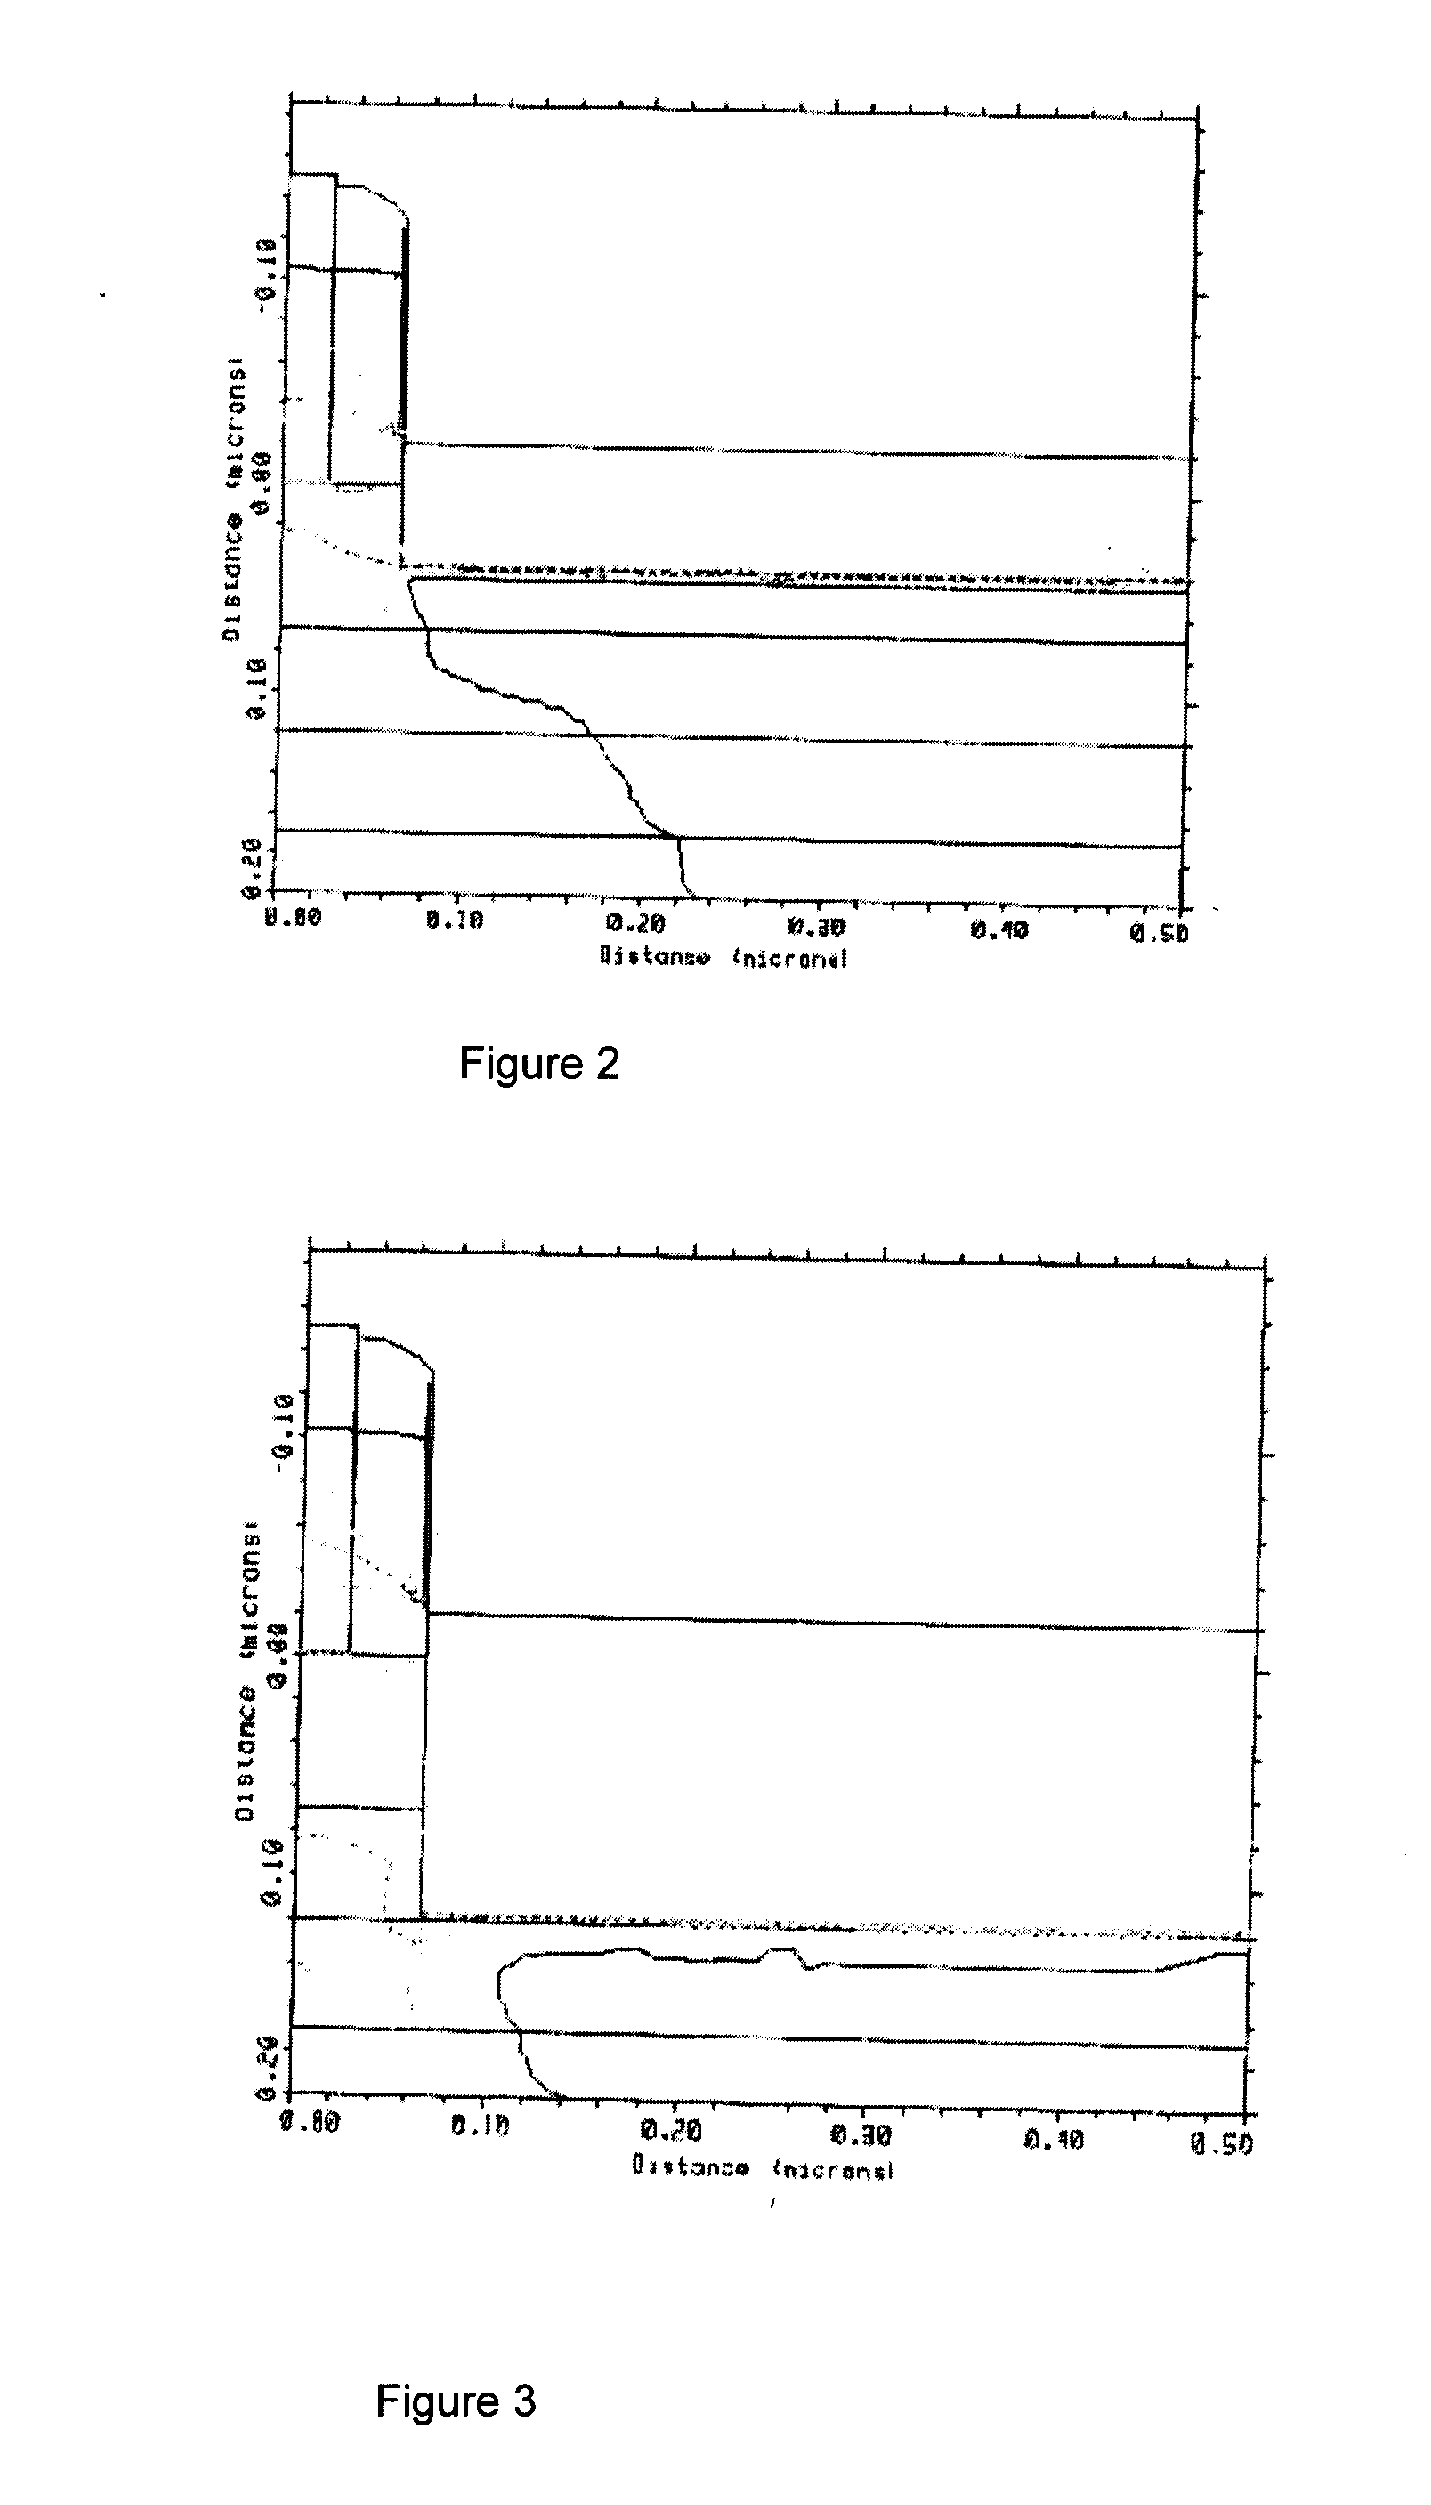 Embedded silicon germanium using a double buried oxide silicon-on-insulator wafer